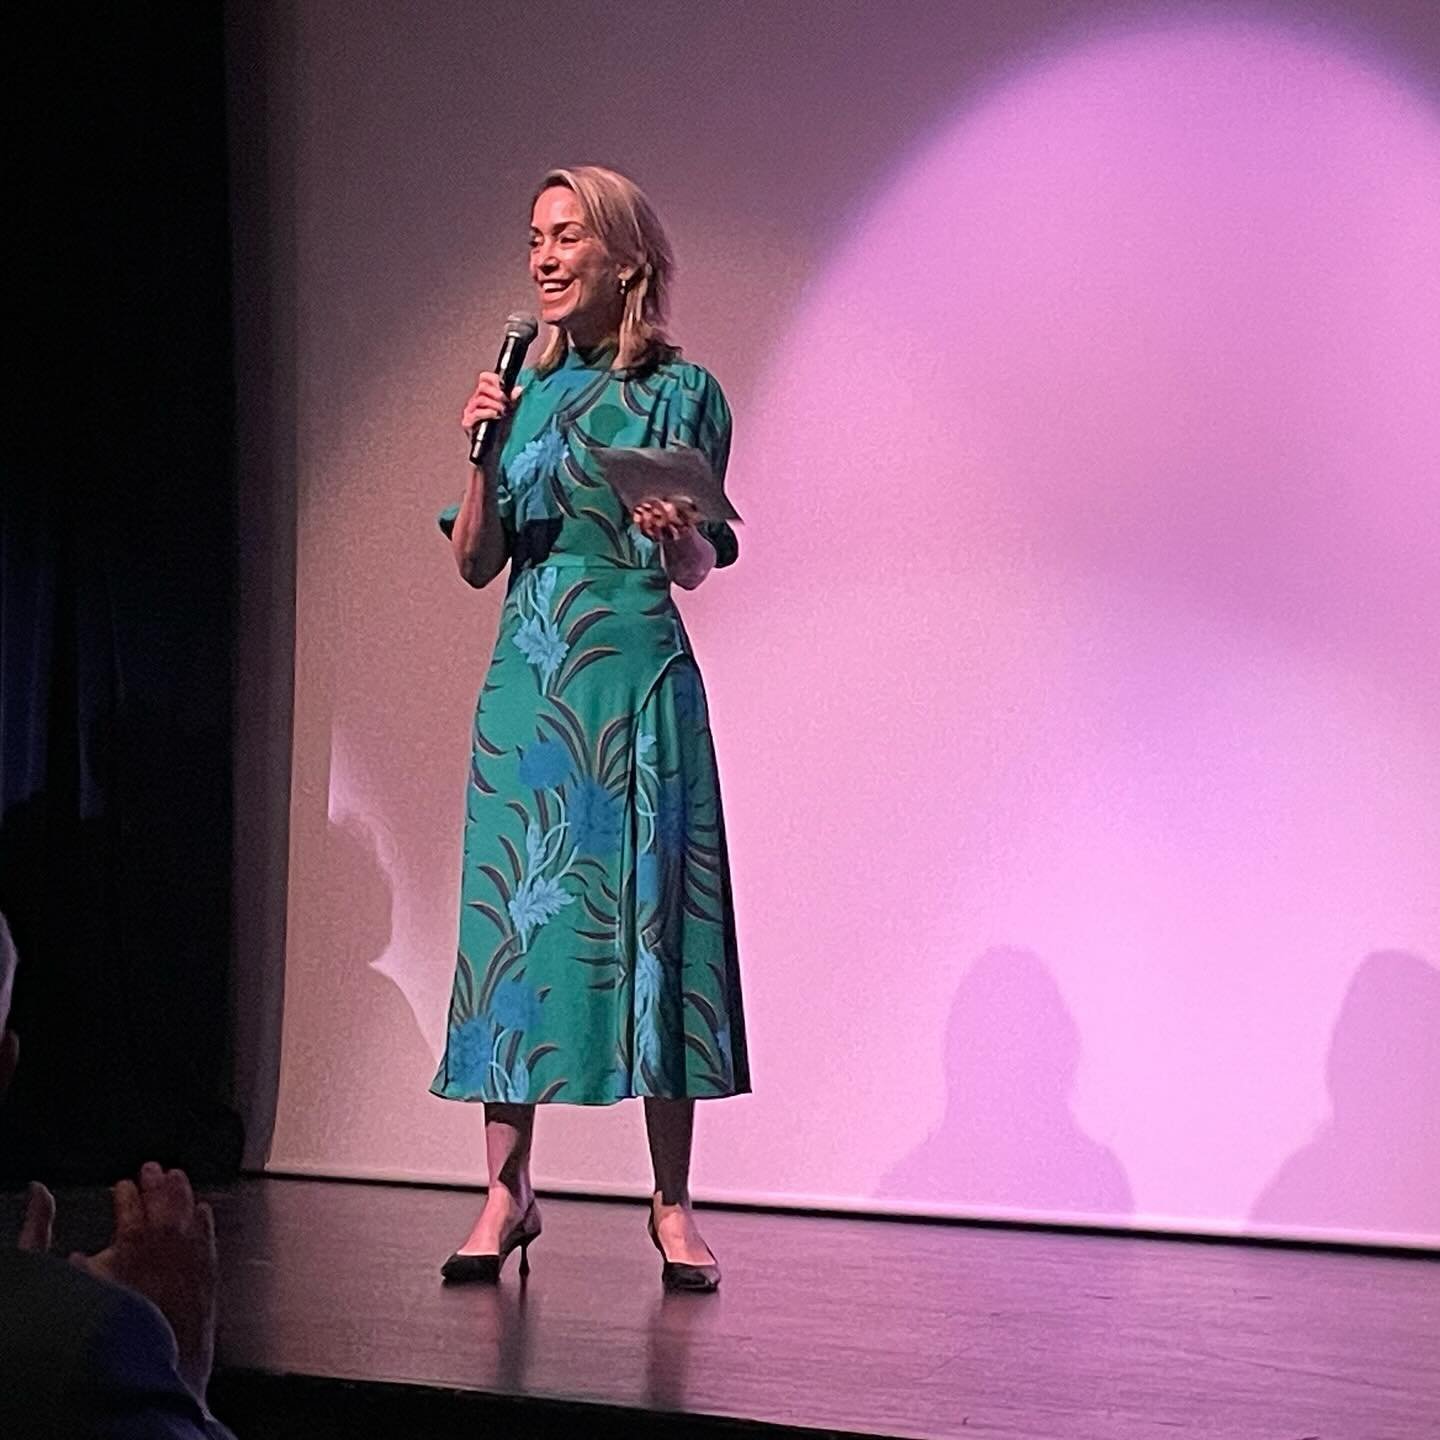 Last night, I had the absolute pleasure of moderating a panel on the film @liveswelllived. 

What an extraordinary gift to take the stage in my community to explore the gifts of aging and life, with all its beauty and hardships, alongside a stage of 